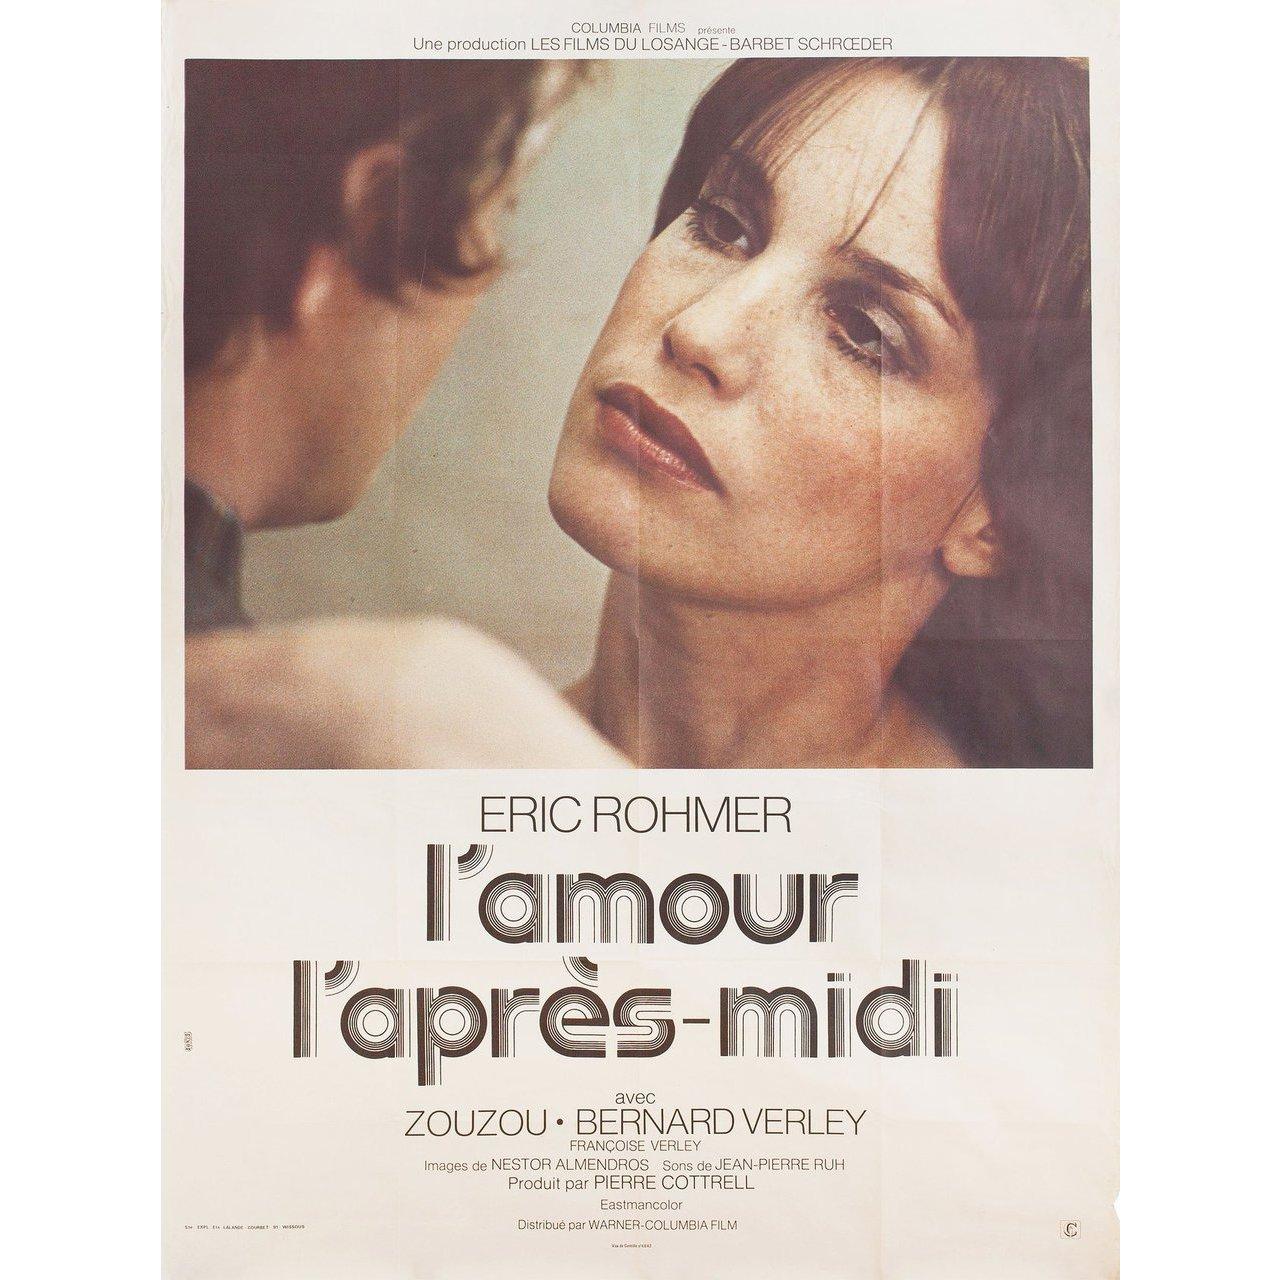 Original 1972 French grande poster for the film Chloe in the Afternoon (L'amour l'apres-midi) directed by Eric Rohmer with Bernard Verley / Zouzou / Francoise Verley / Daniel Ceccaldi. Very good condition, folded. Many original posters were issued